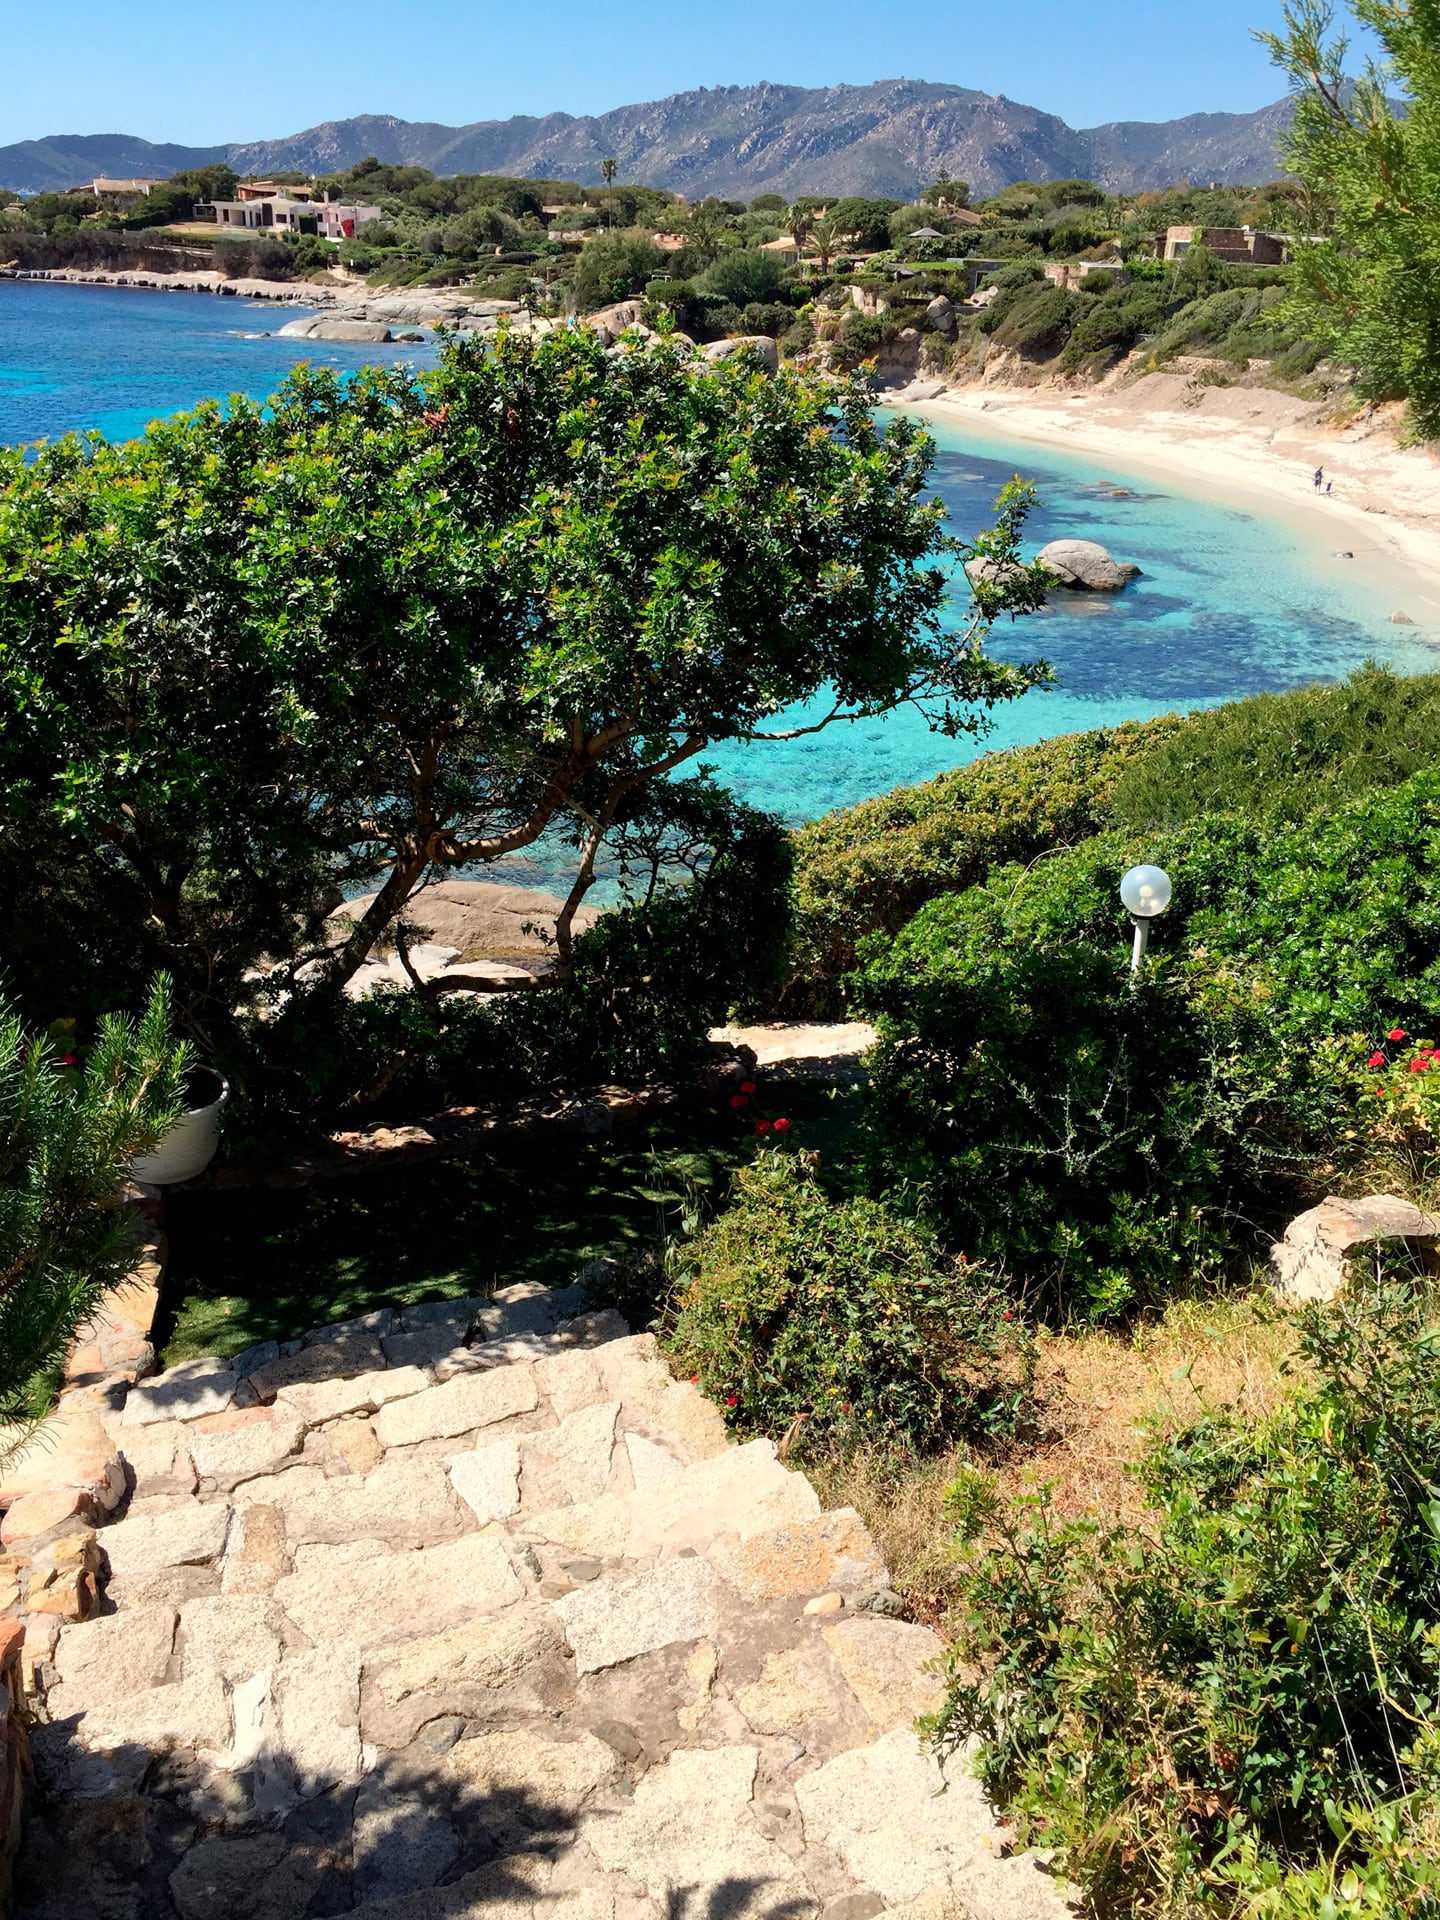 direct access to the beach of Cala Caterina from the house